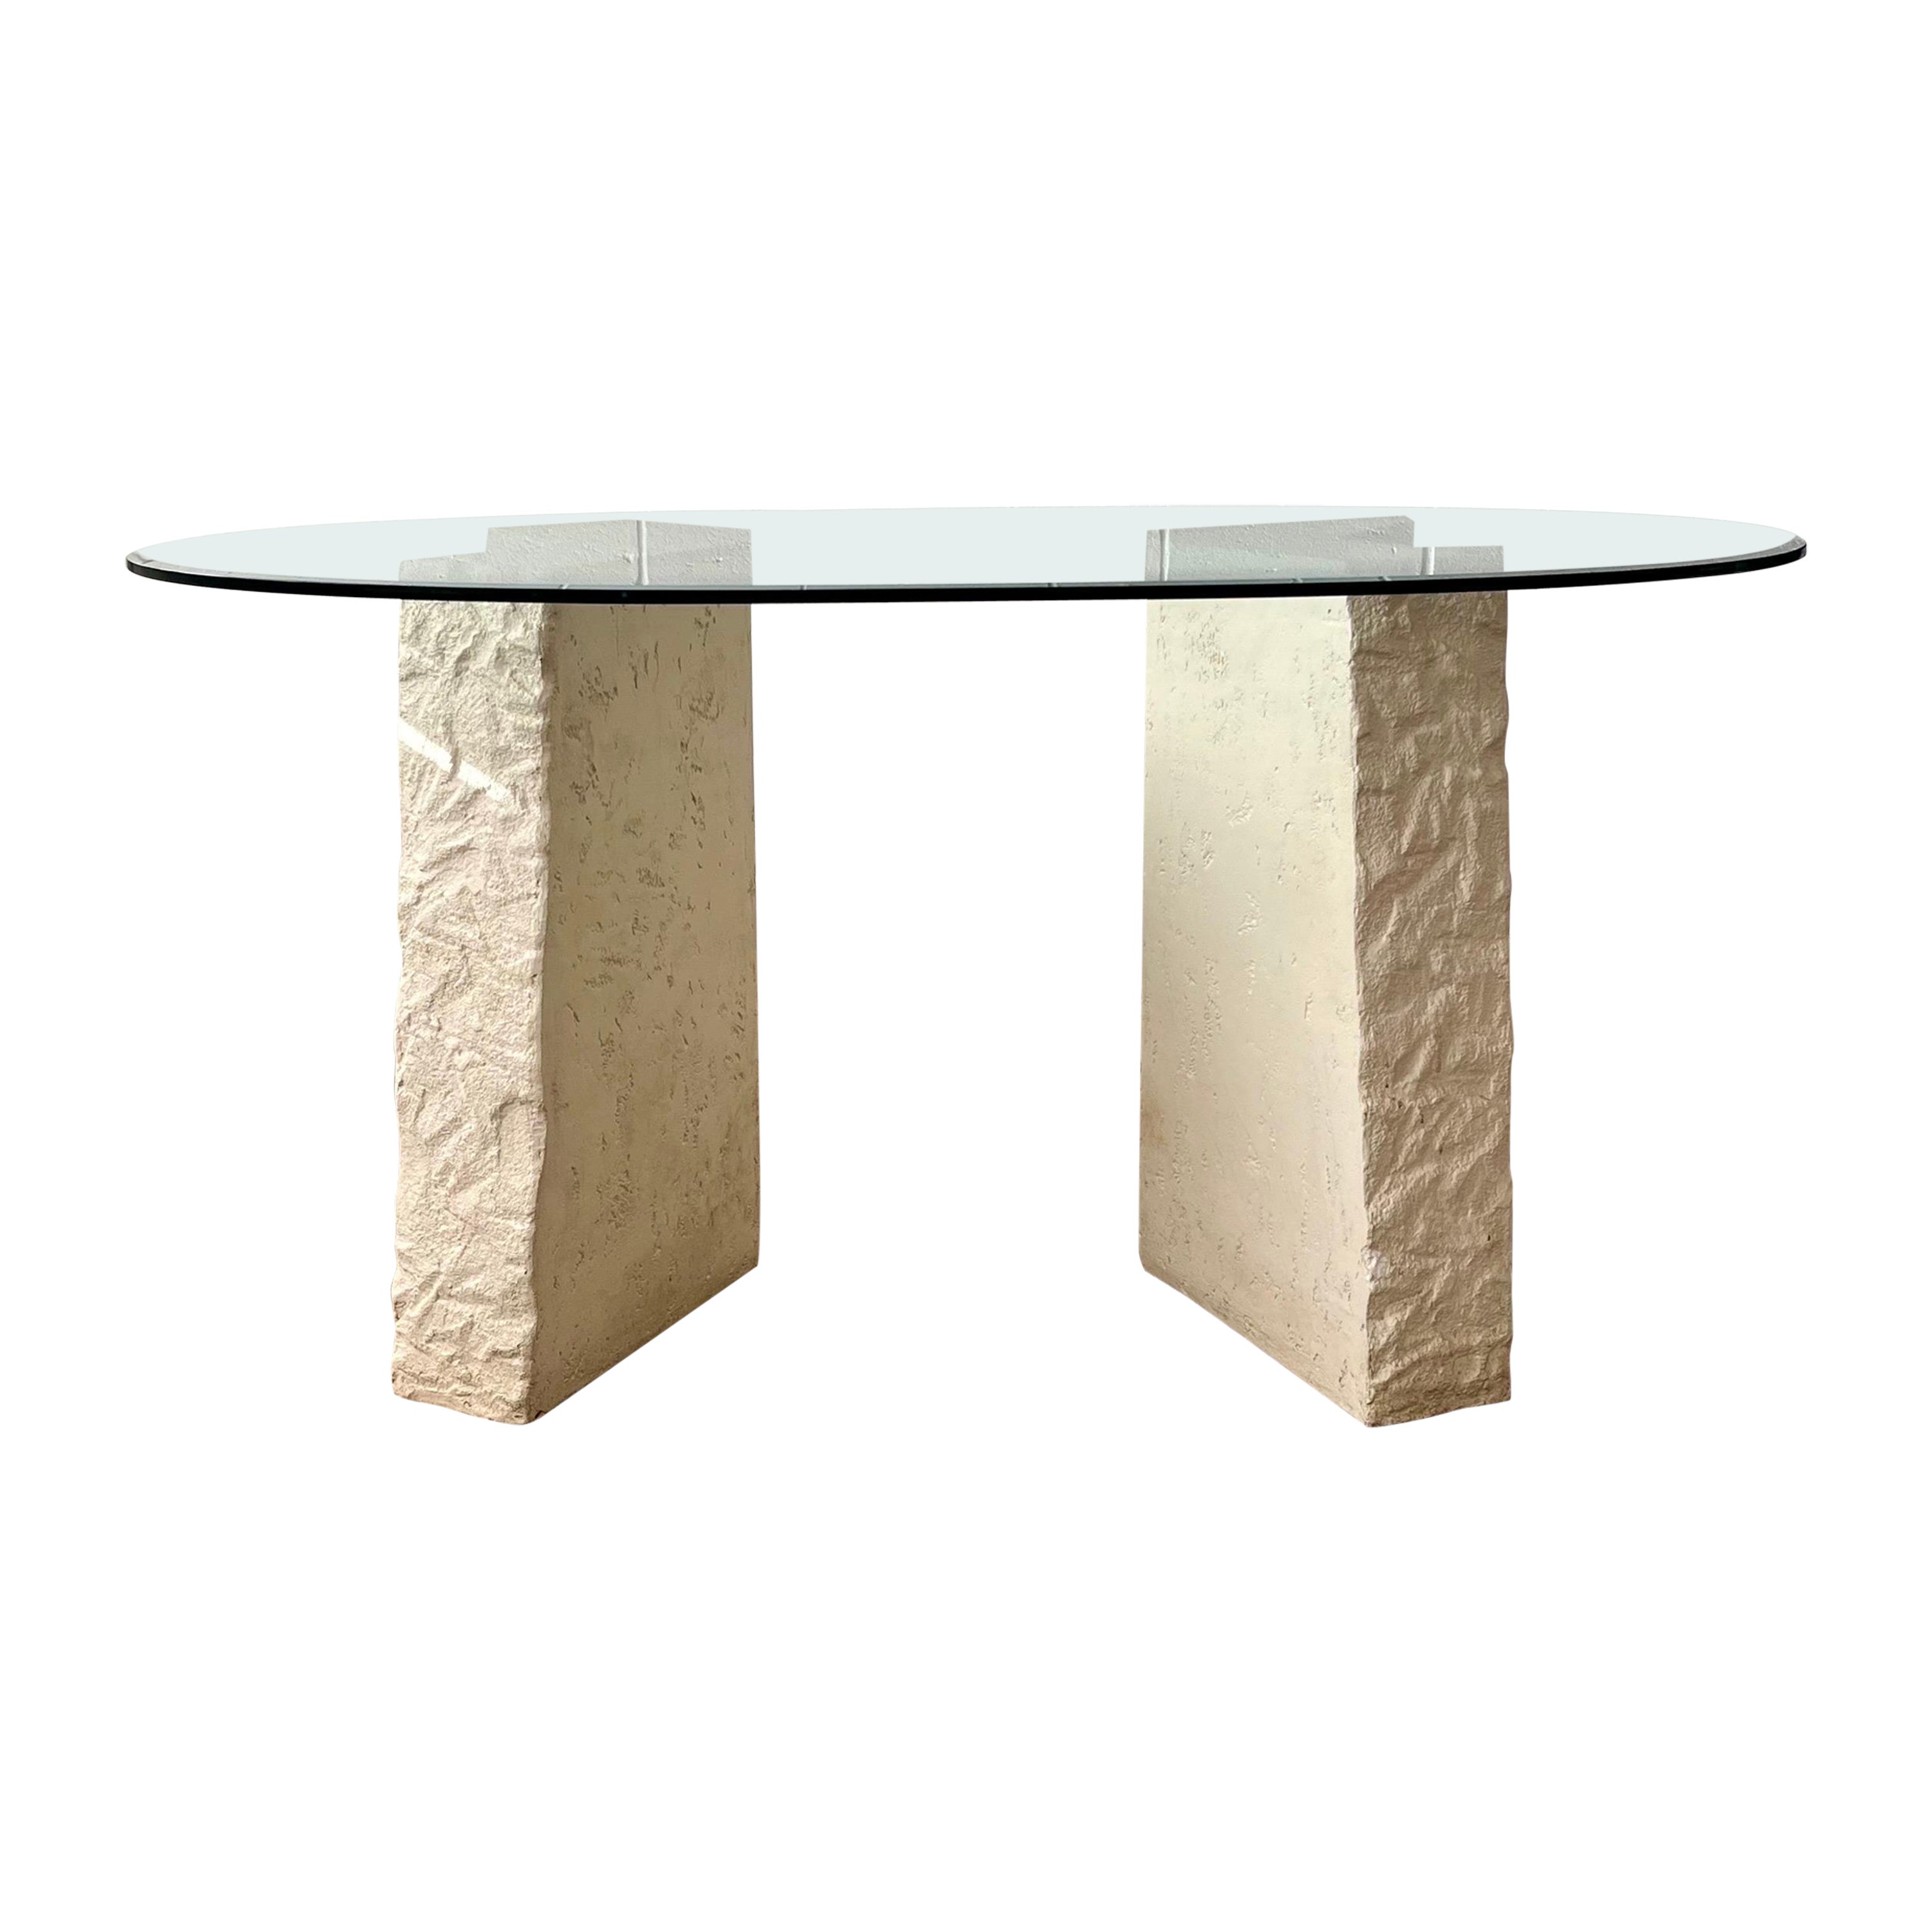 Postmodern Sculptural Plaster and Glass Dining Table